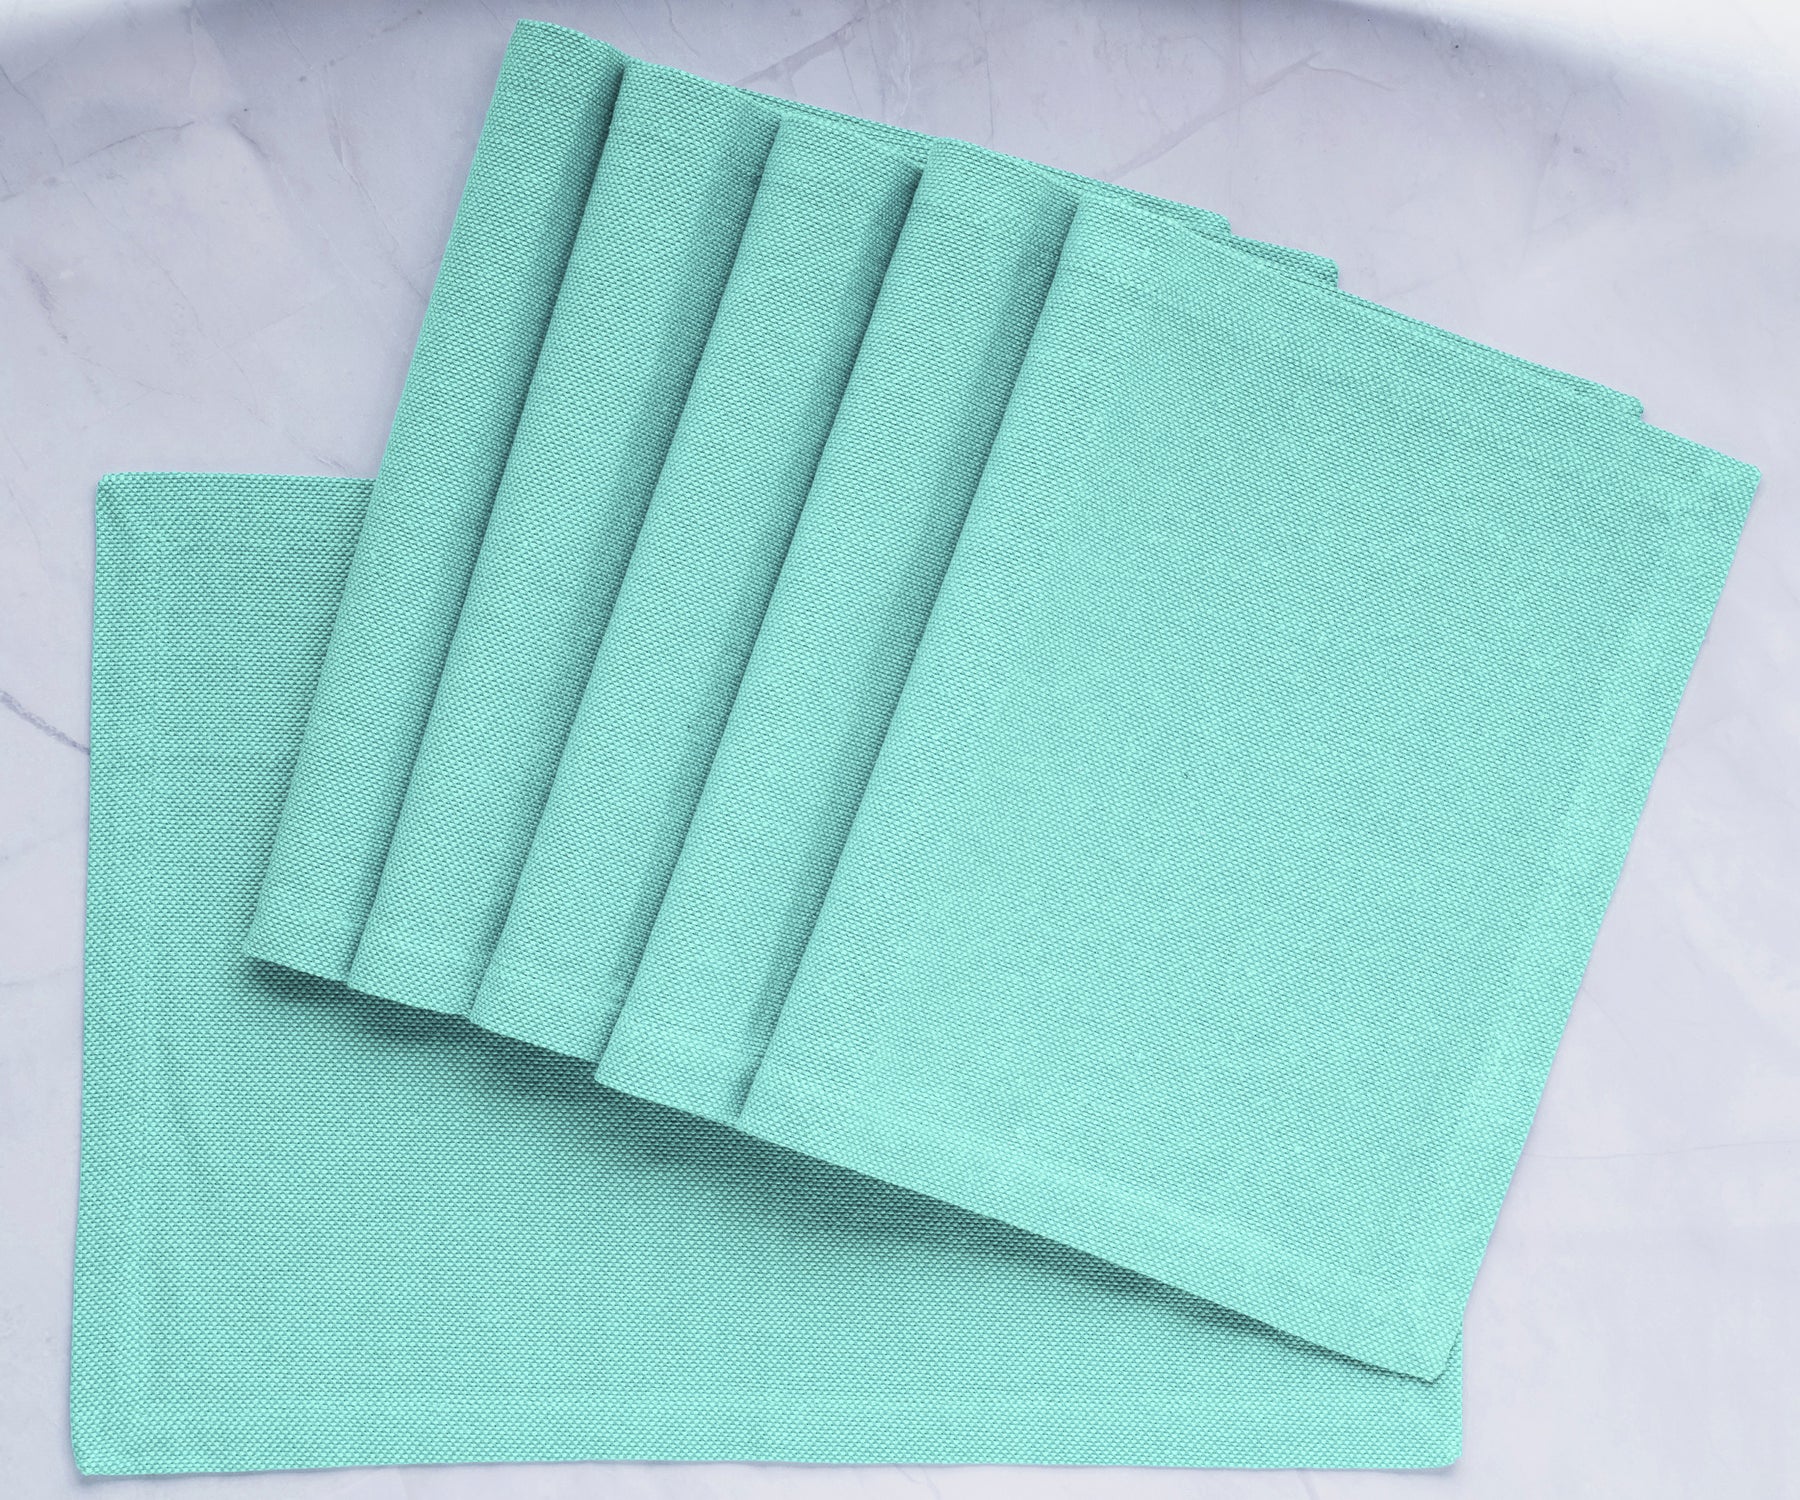 Transform your dining table with green fabric placemats, providing charm and protection for a delightful and stylish mealtime upgrade.